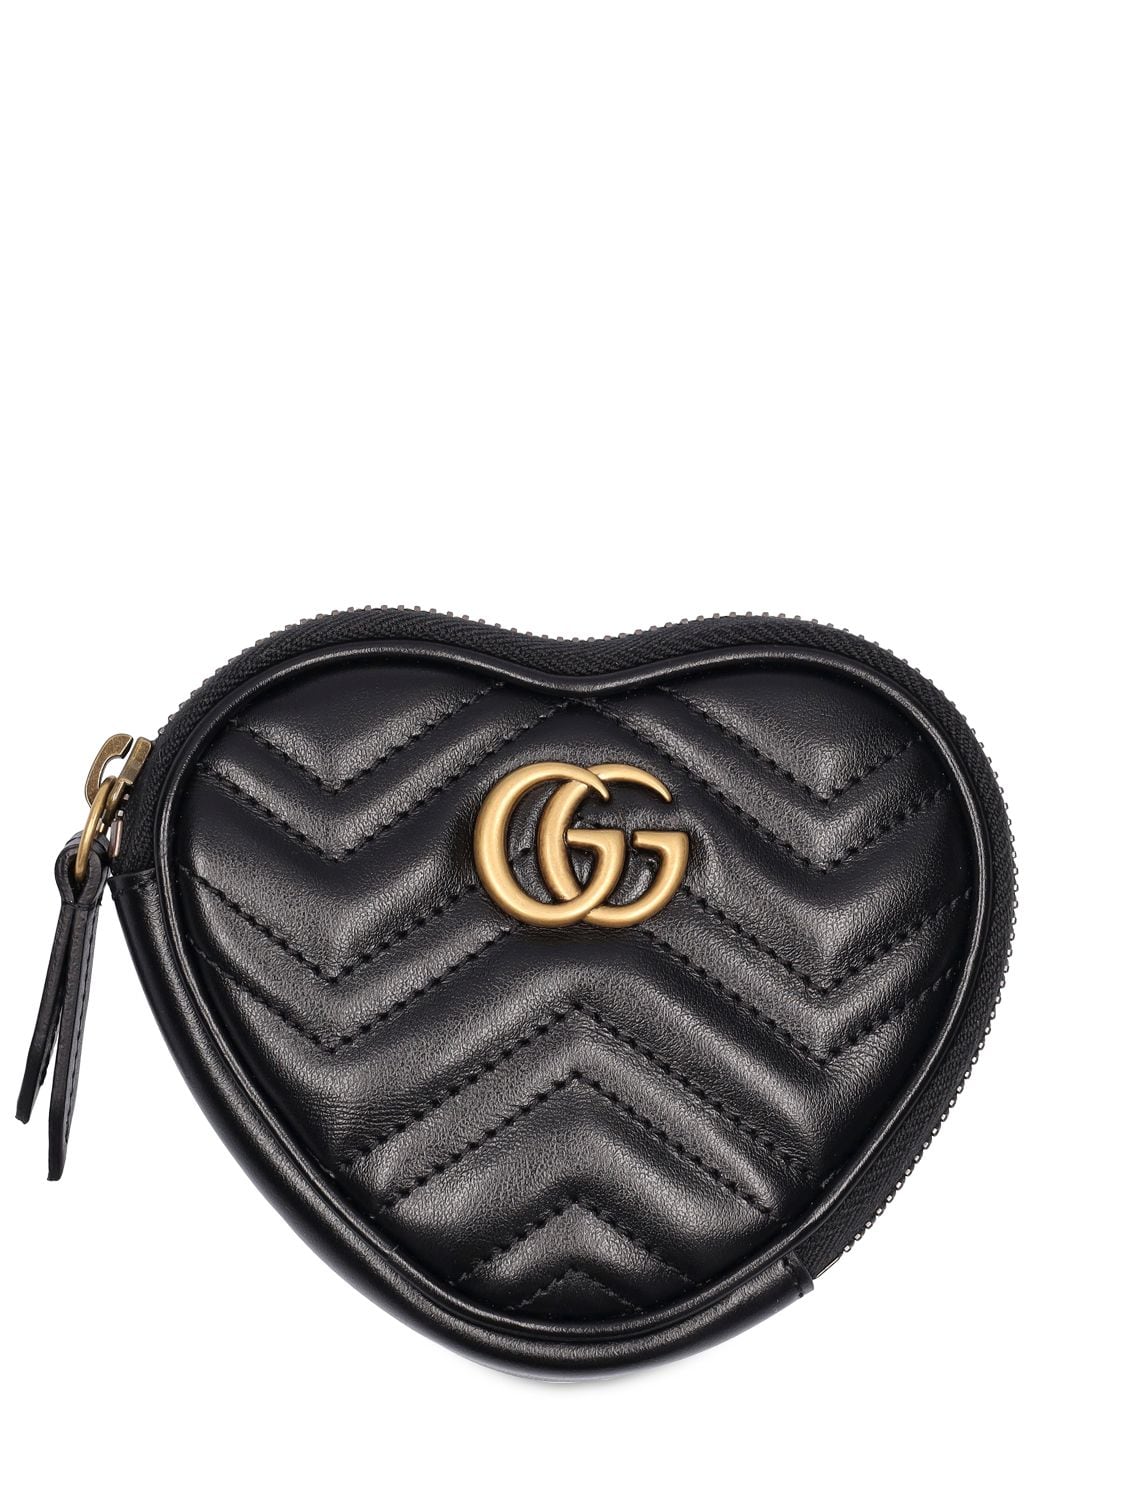 Handbag Wallet Leather Coin purse, GUCCI Gucci purse 409342, rectangle,  leather png